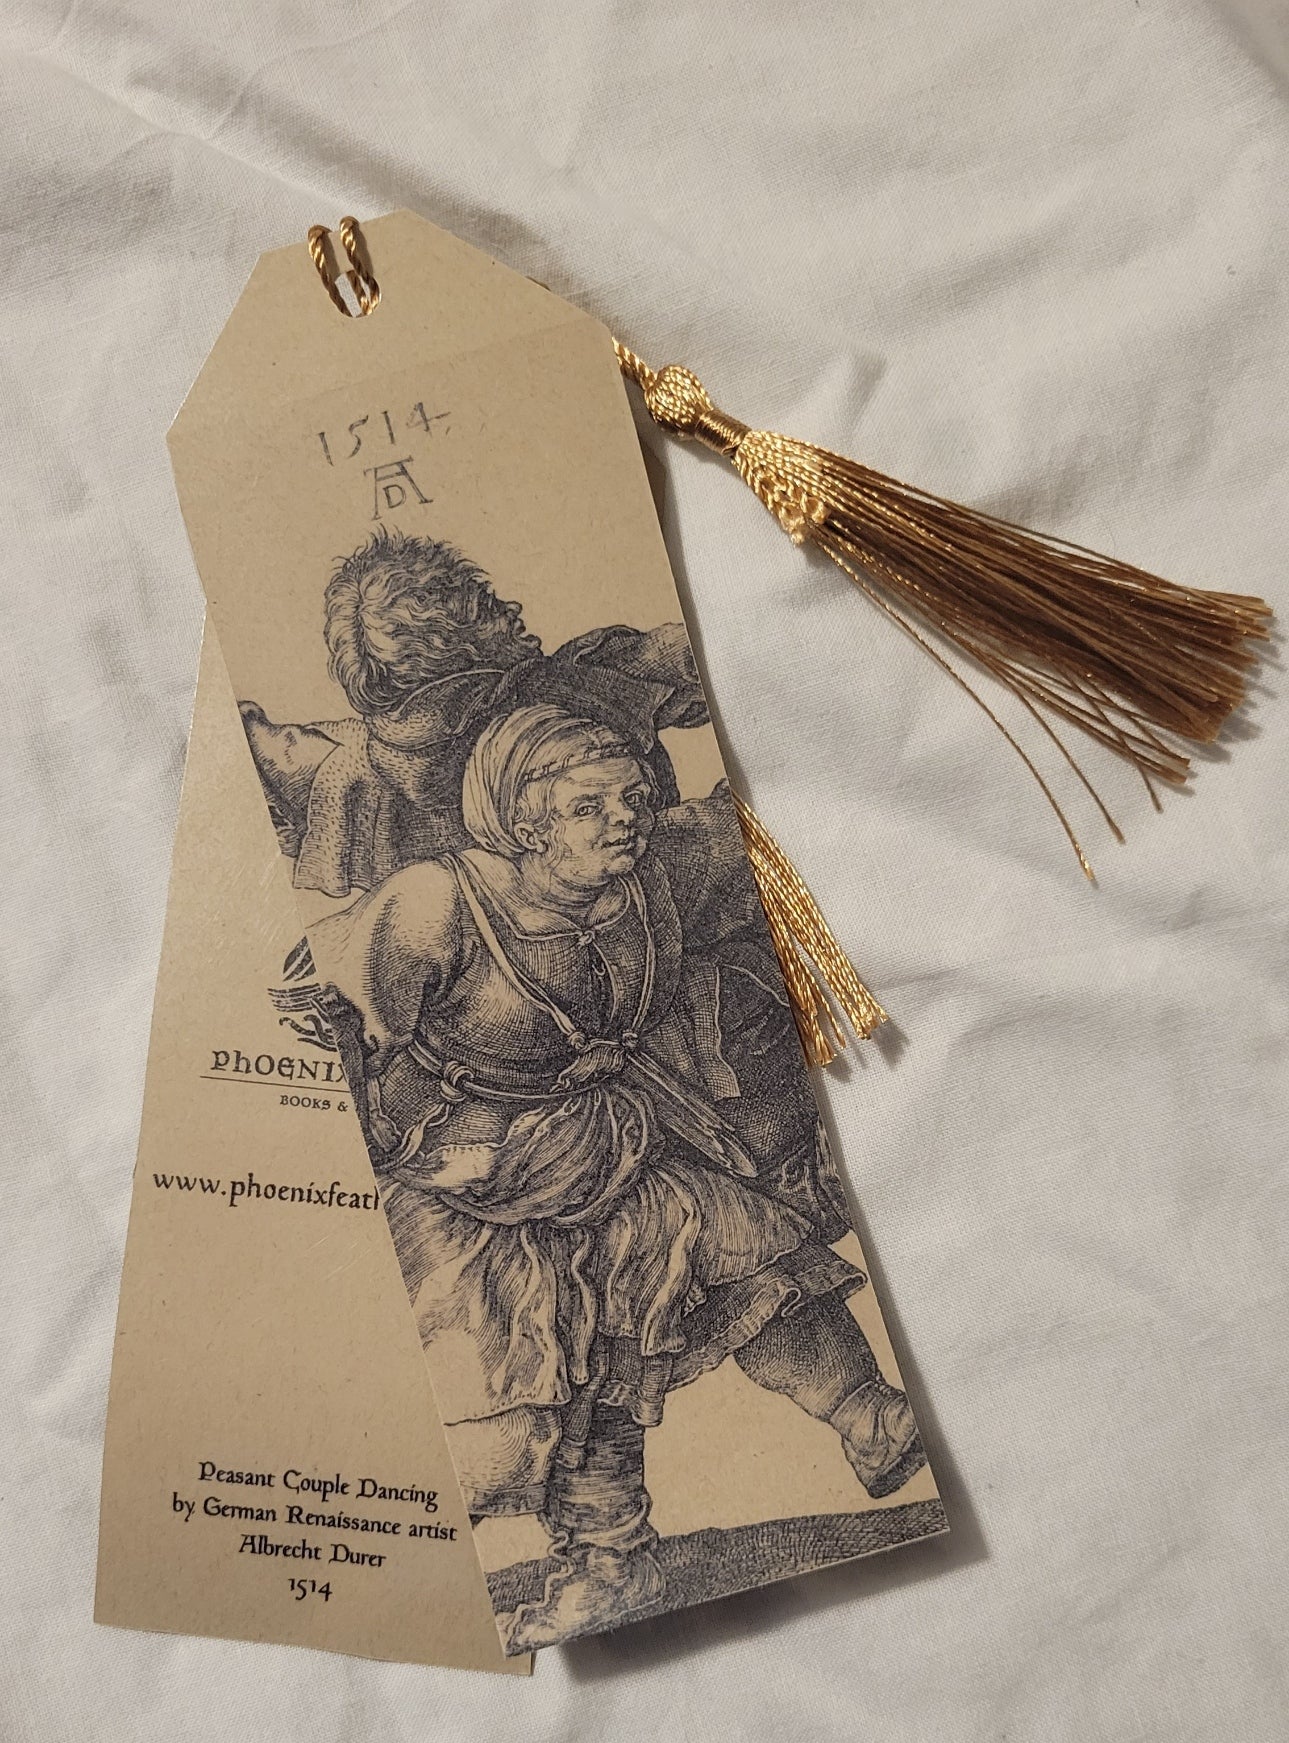 Handmade by Phoenix Feather Books & Curios, laminated bookmark, decorated with German Renaissance artist Albrecht Durer's Peasant Dancing Couple engraving from 1514.  Size: 2.25" x 7"